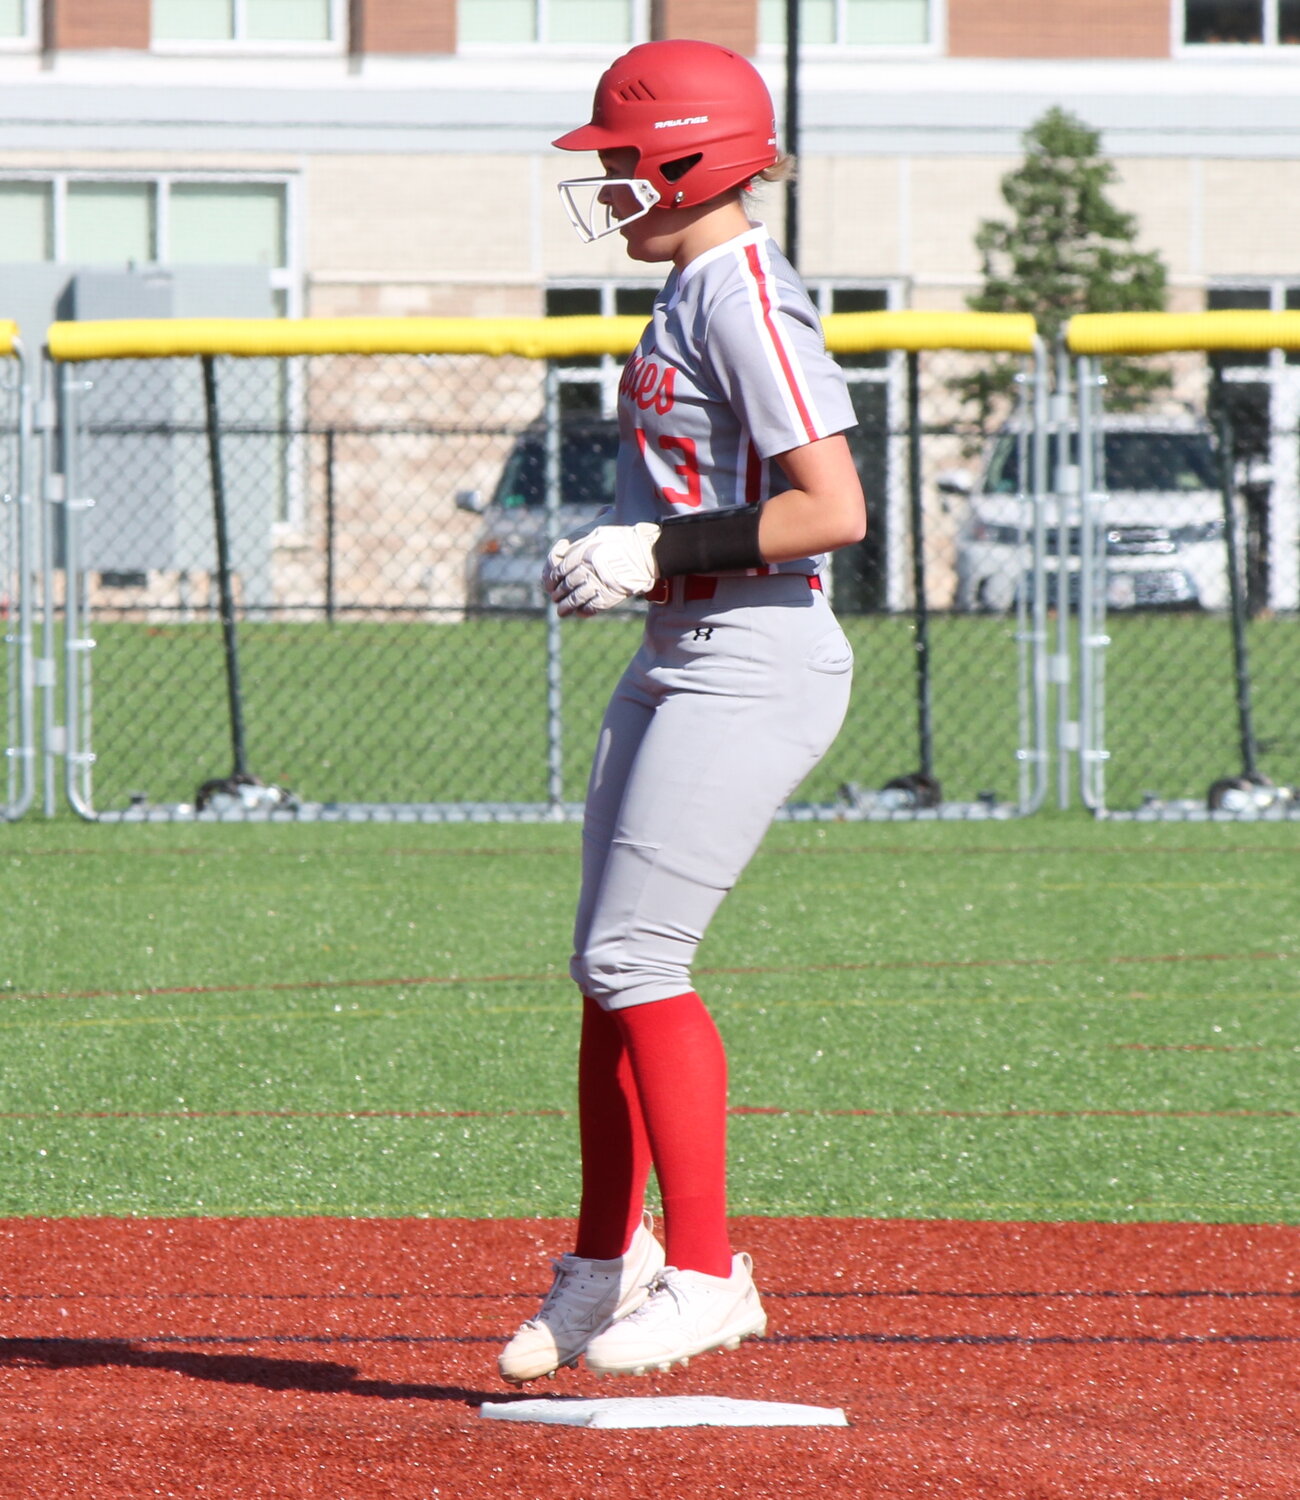 Keira Quadros stands at second after doubling for the Townies.